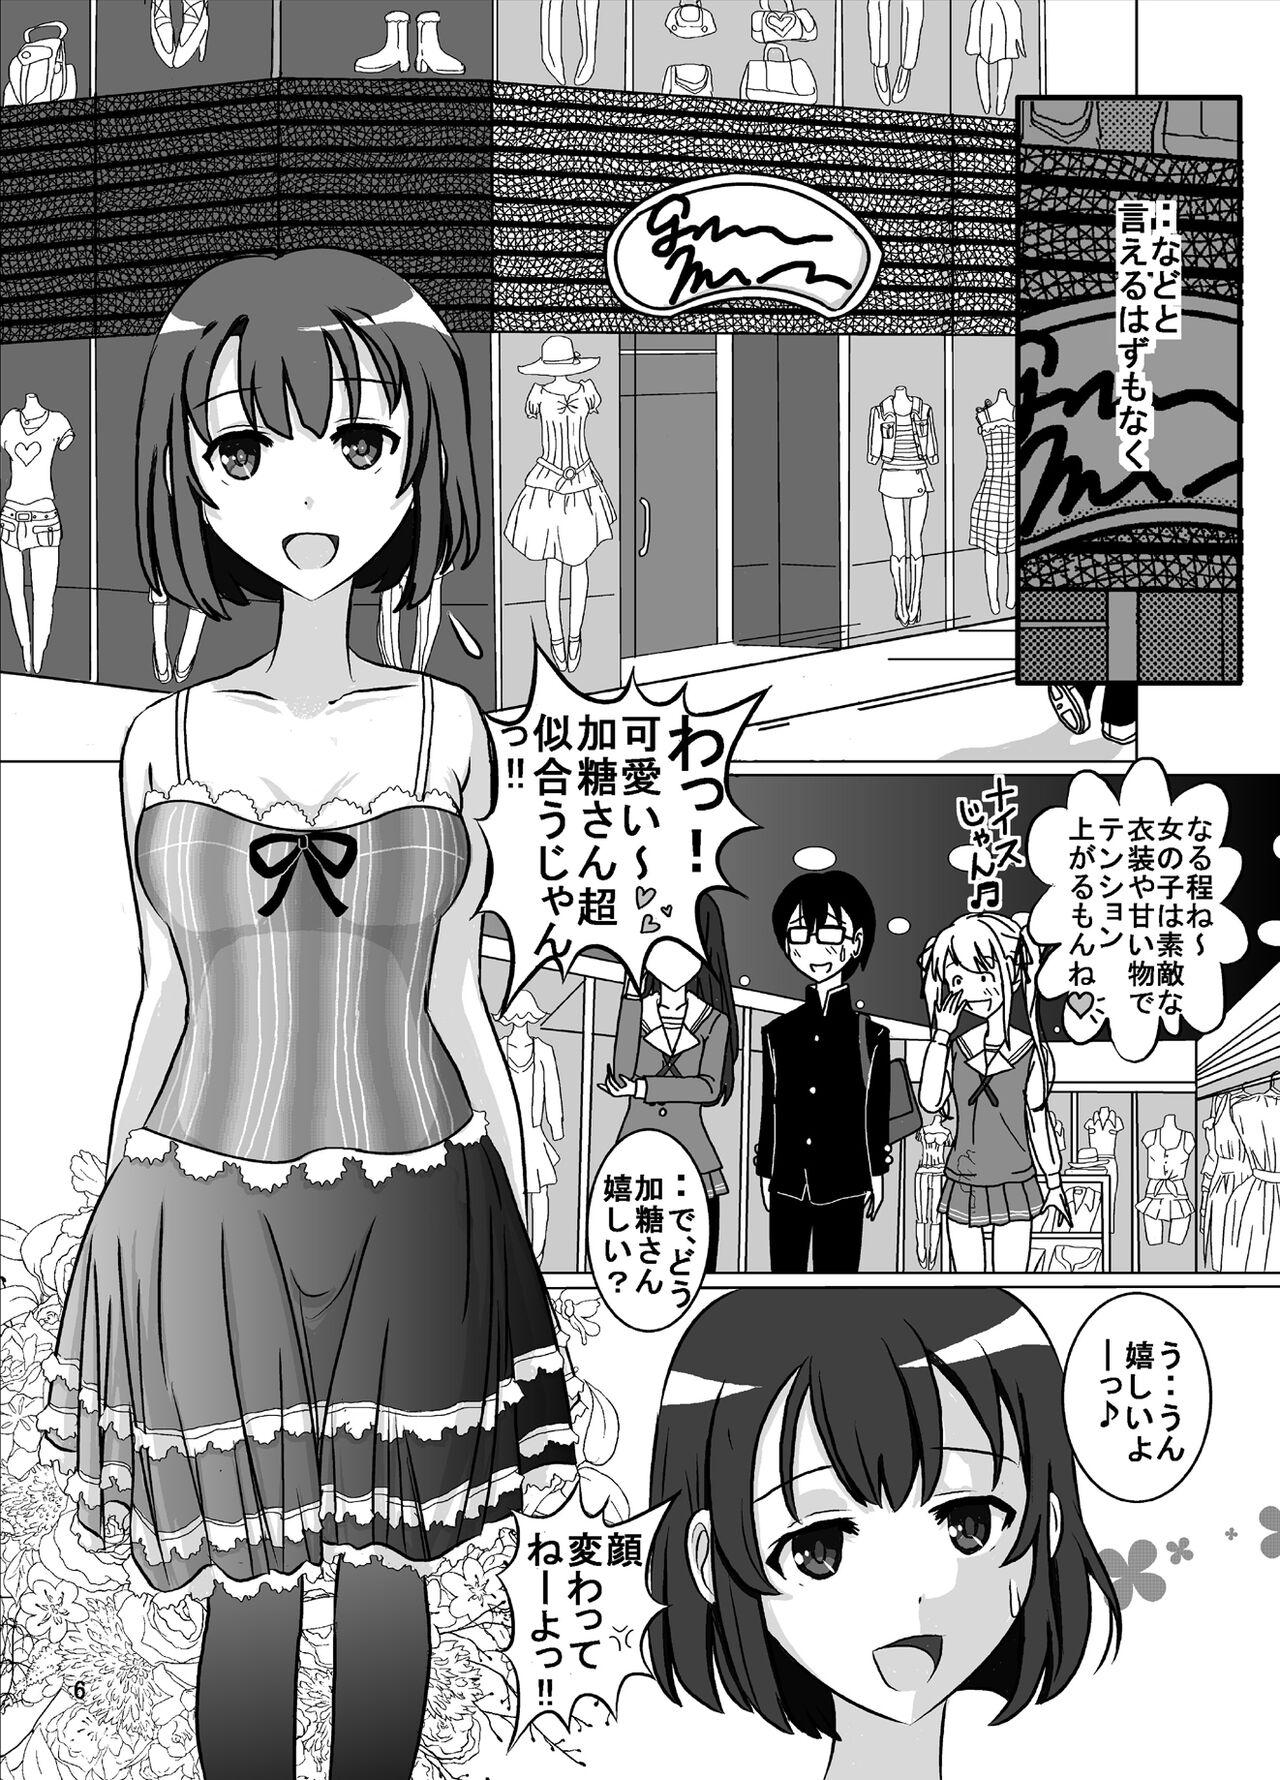 Chick How To Make A Public Spectacle LOL - Saenai heroine no sodatekata Mujer - Page 6